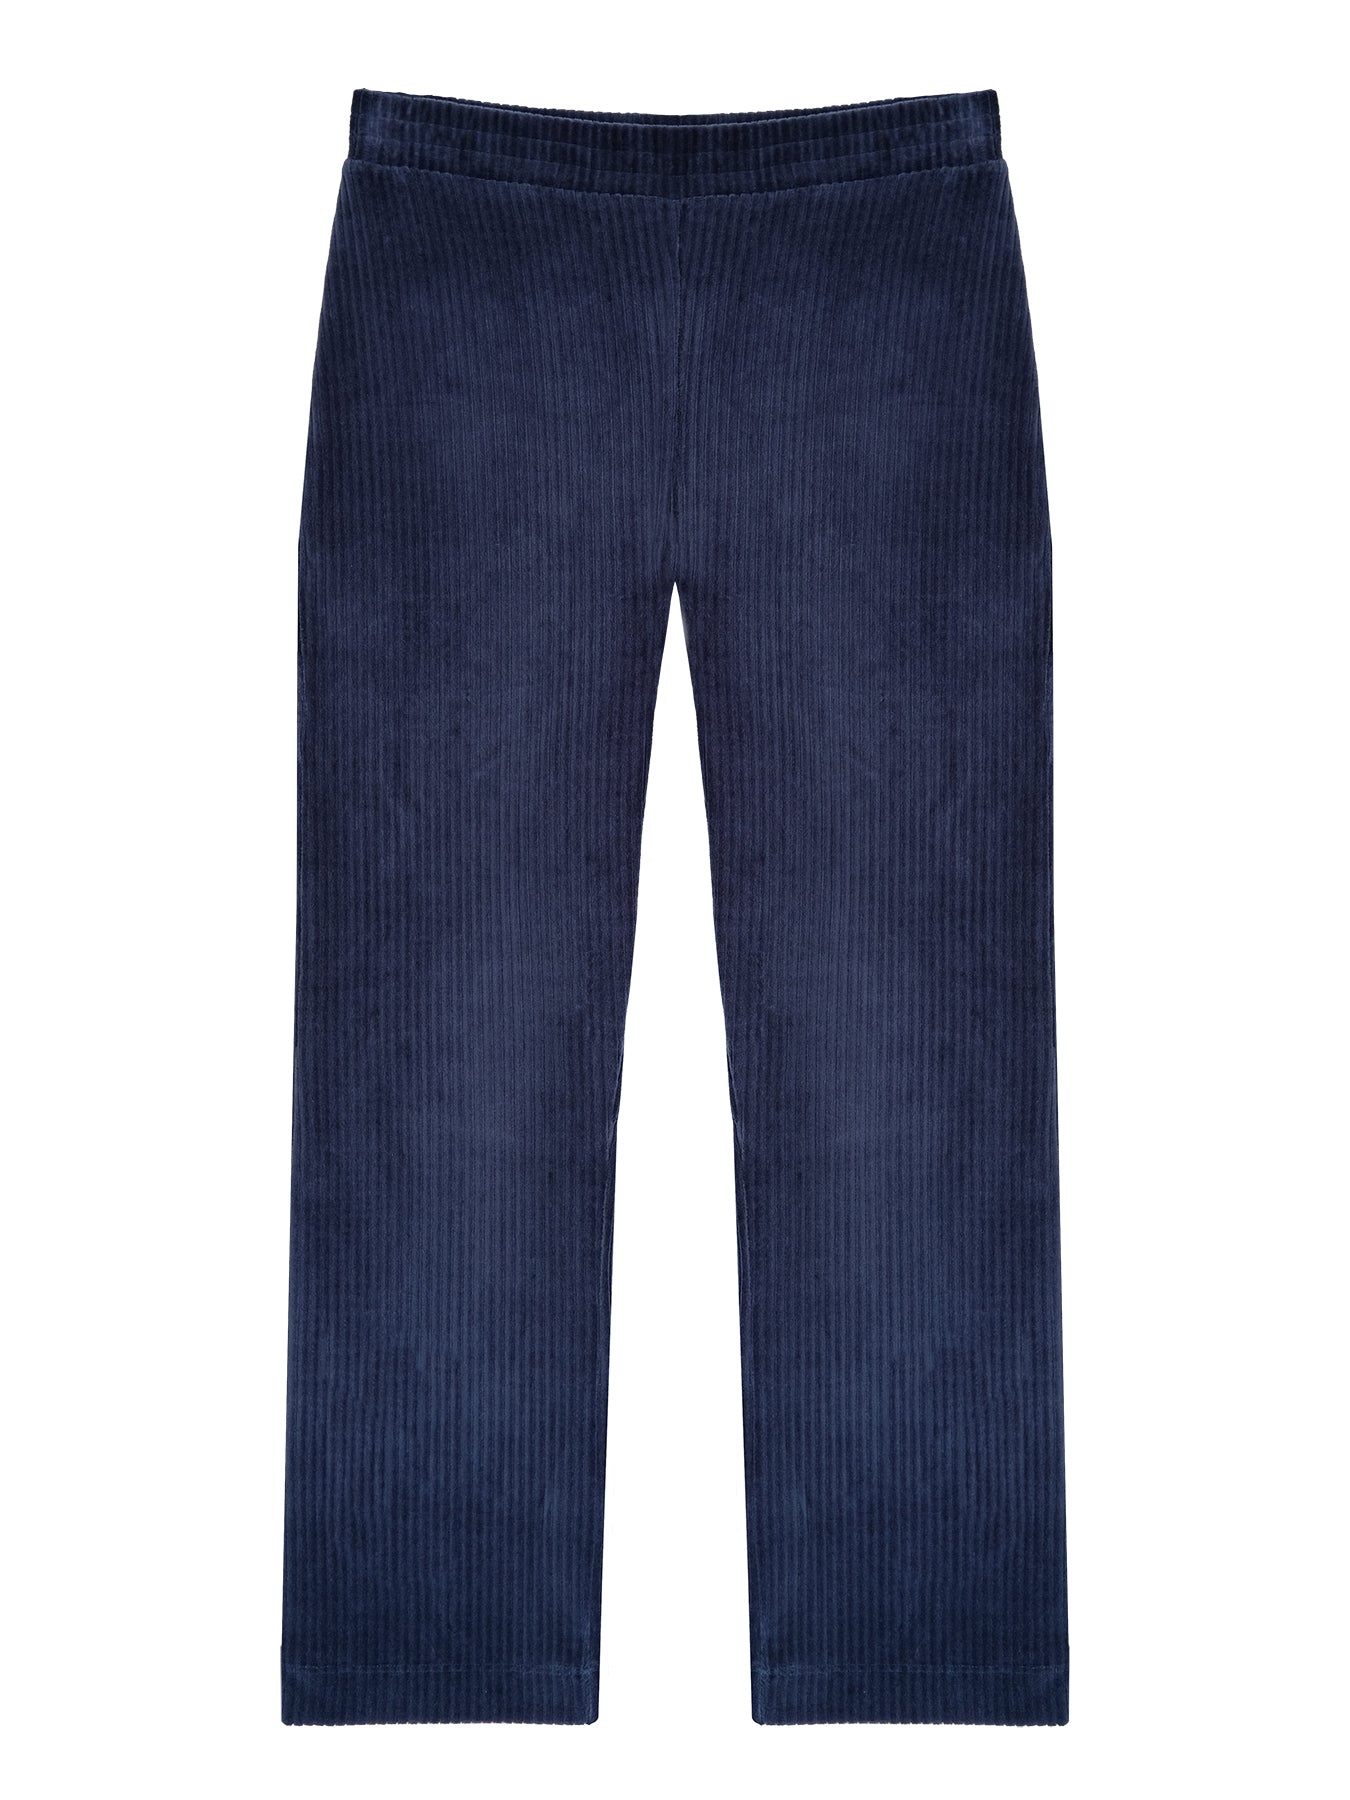 ANGIE pant Navy Corduroy - Lesley Evers-angie-blue pant-corduroy